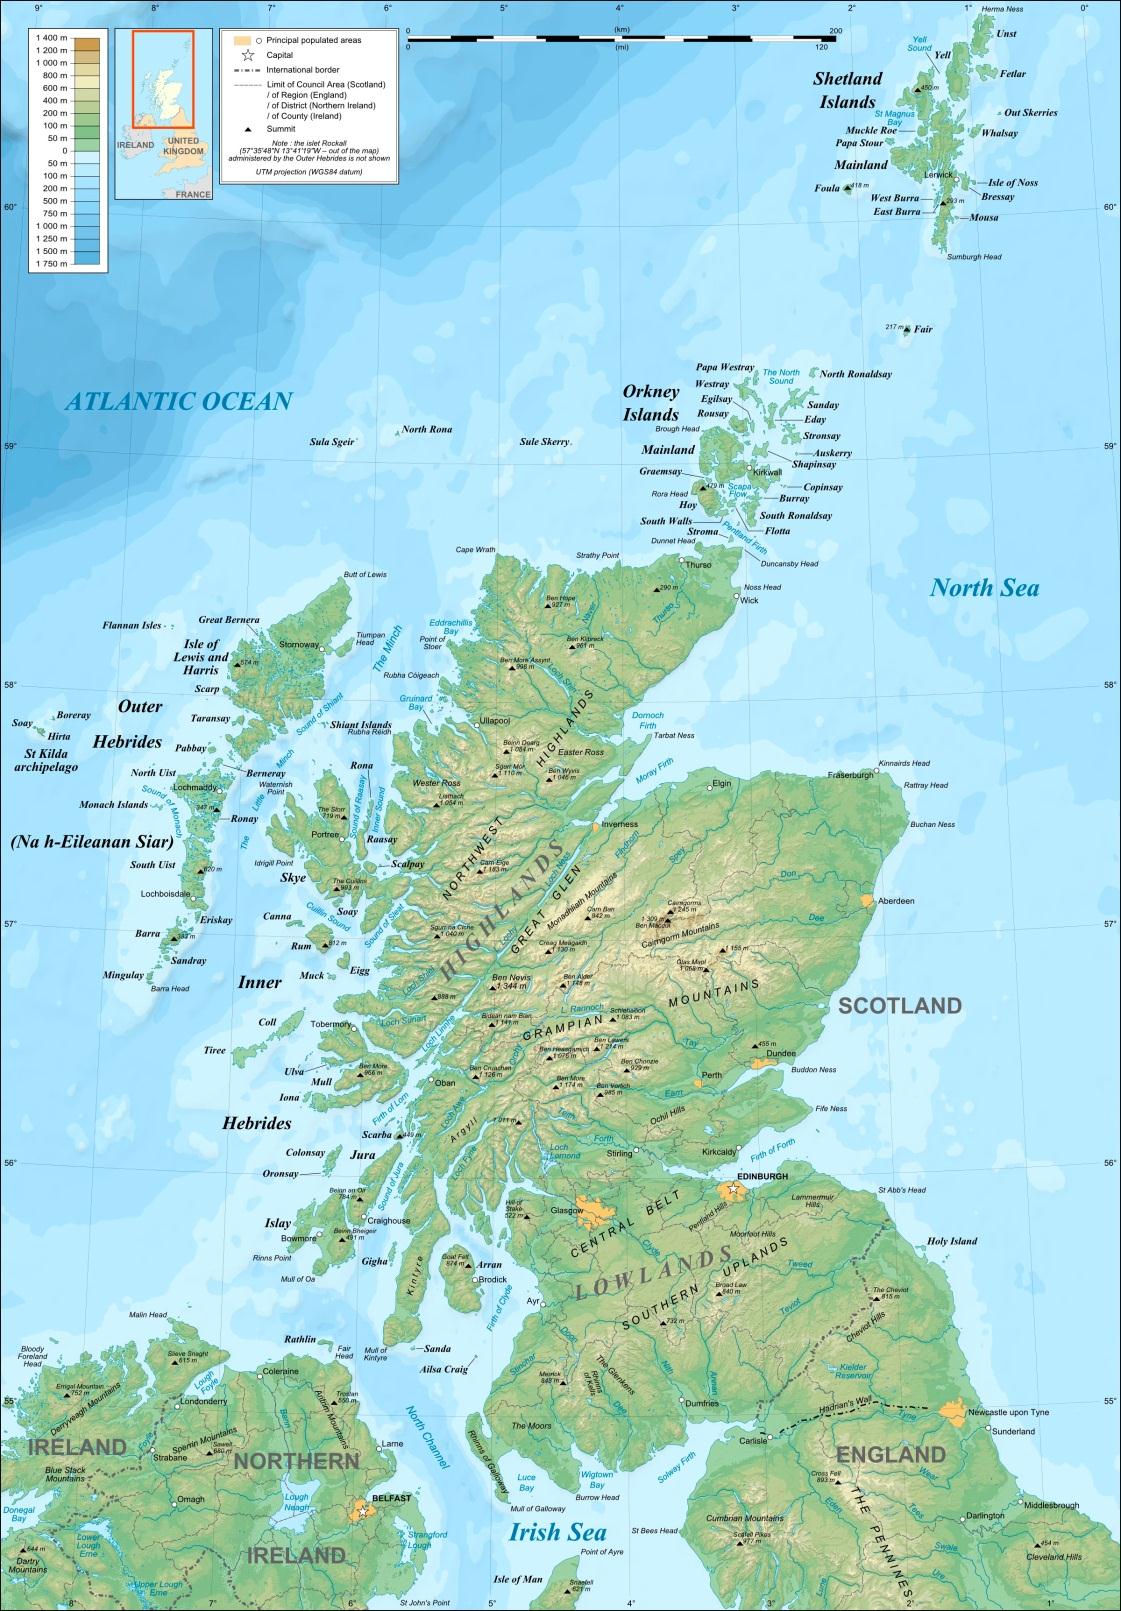 FIND in the map: Highlands mountainous area Lowlands hilly area Ben Nevis the highest peak Loch Lomond - the largest lake - 40km long Loch